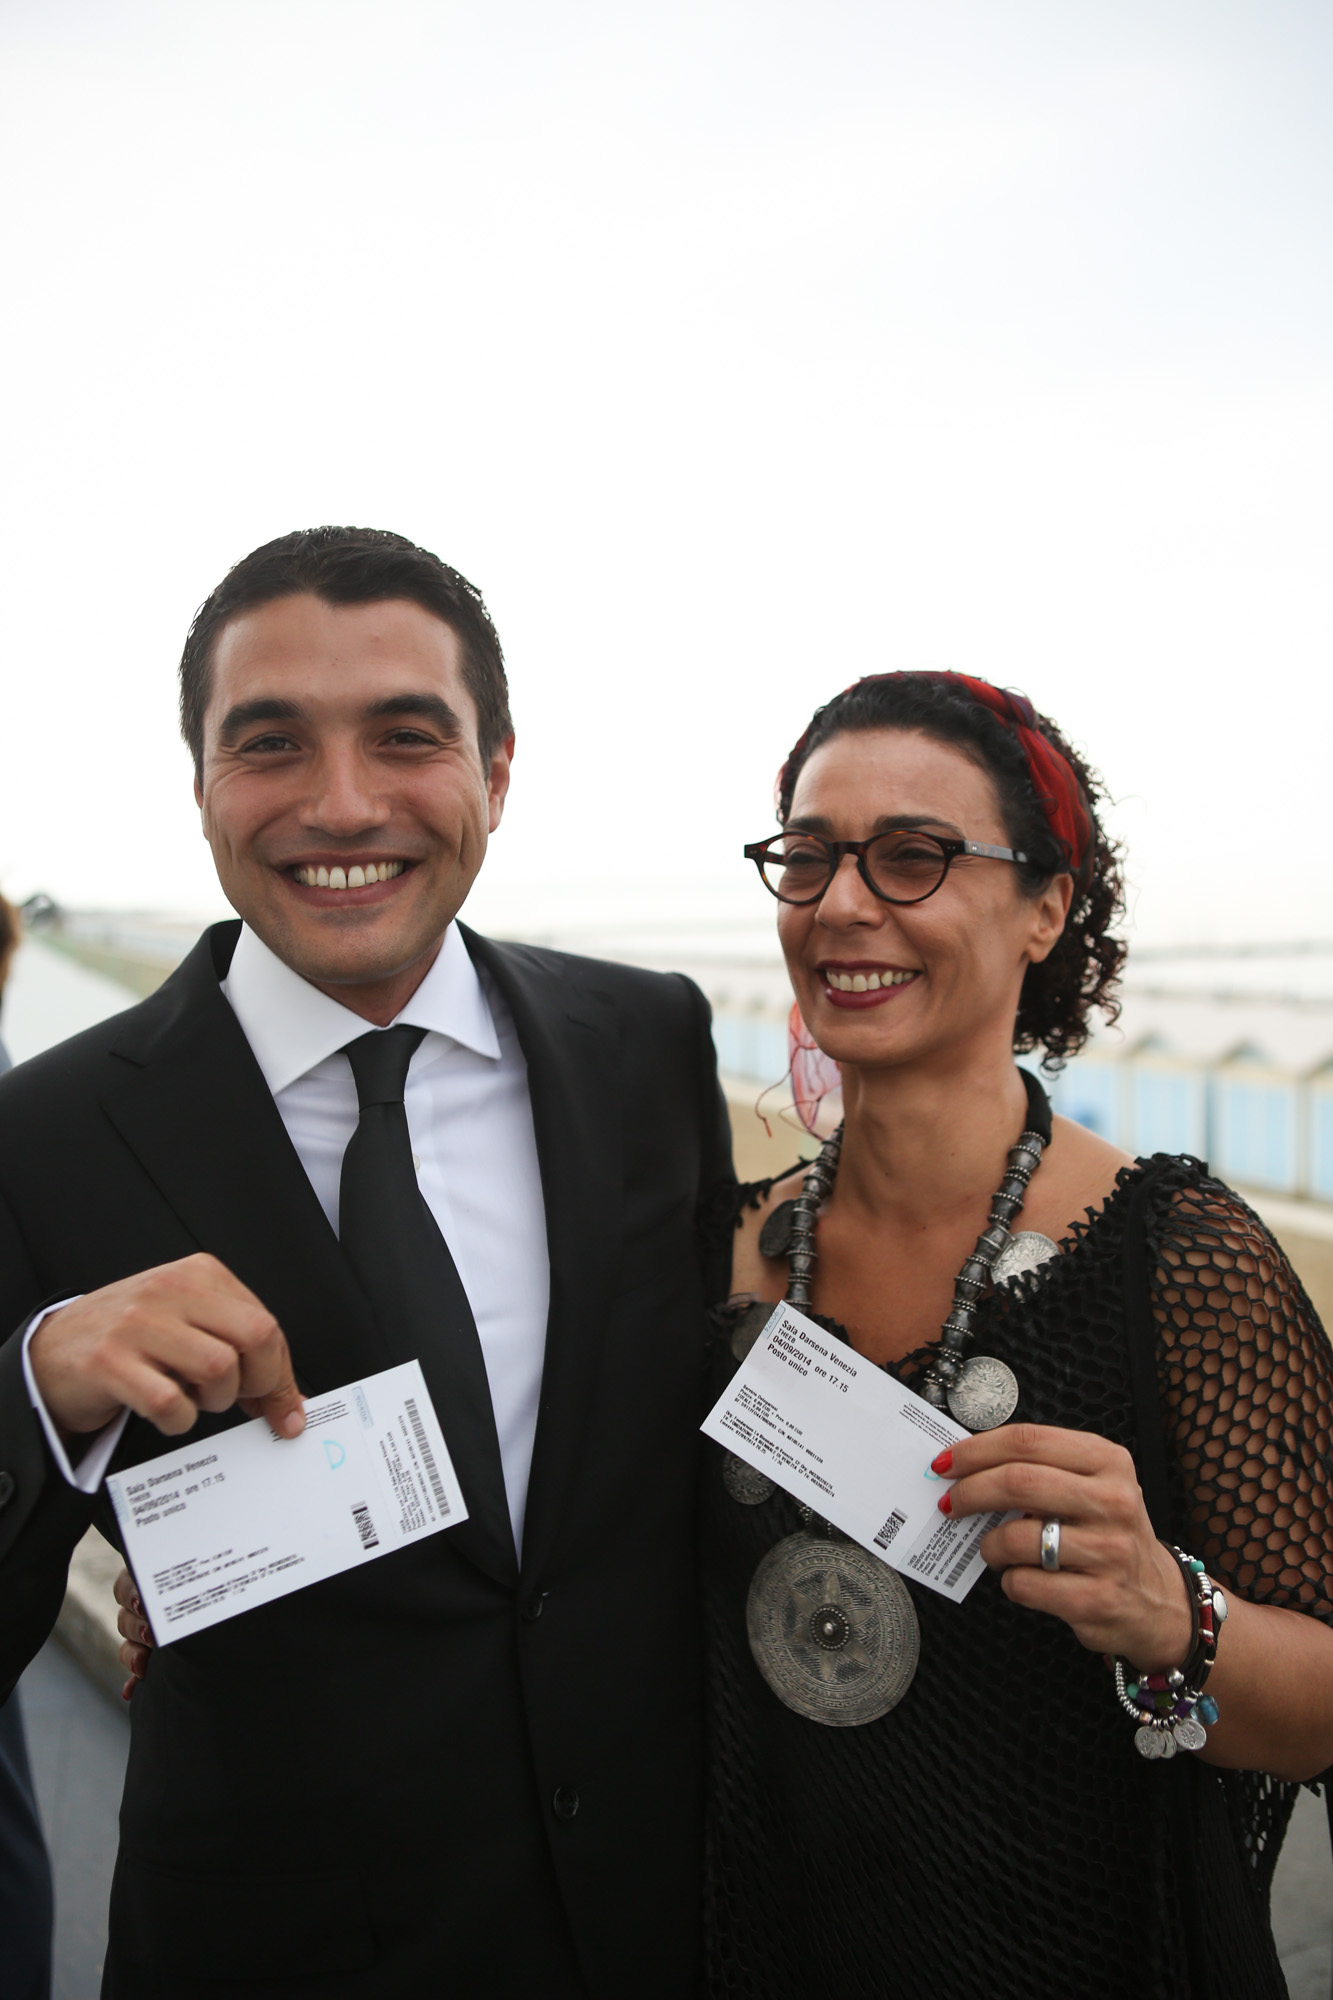 Got our tickets for the world premiere of Theeb, with writer/director Naji Abu Nowar. Venezia 71.